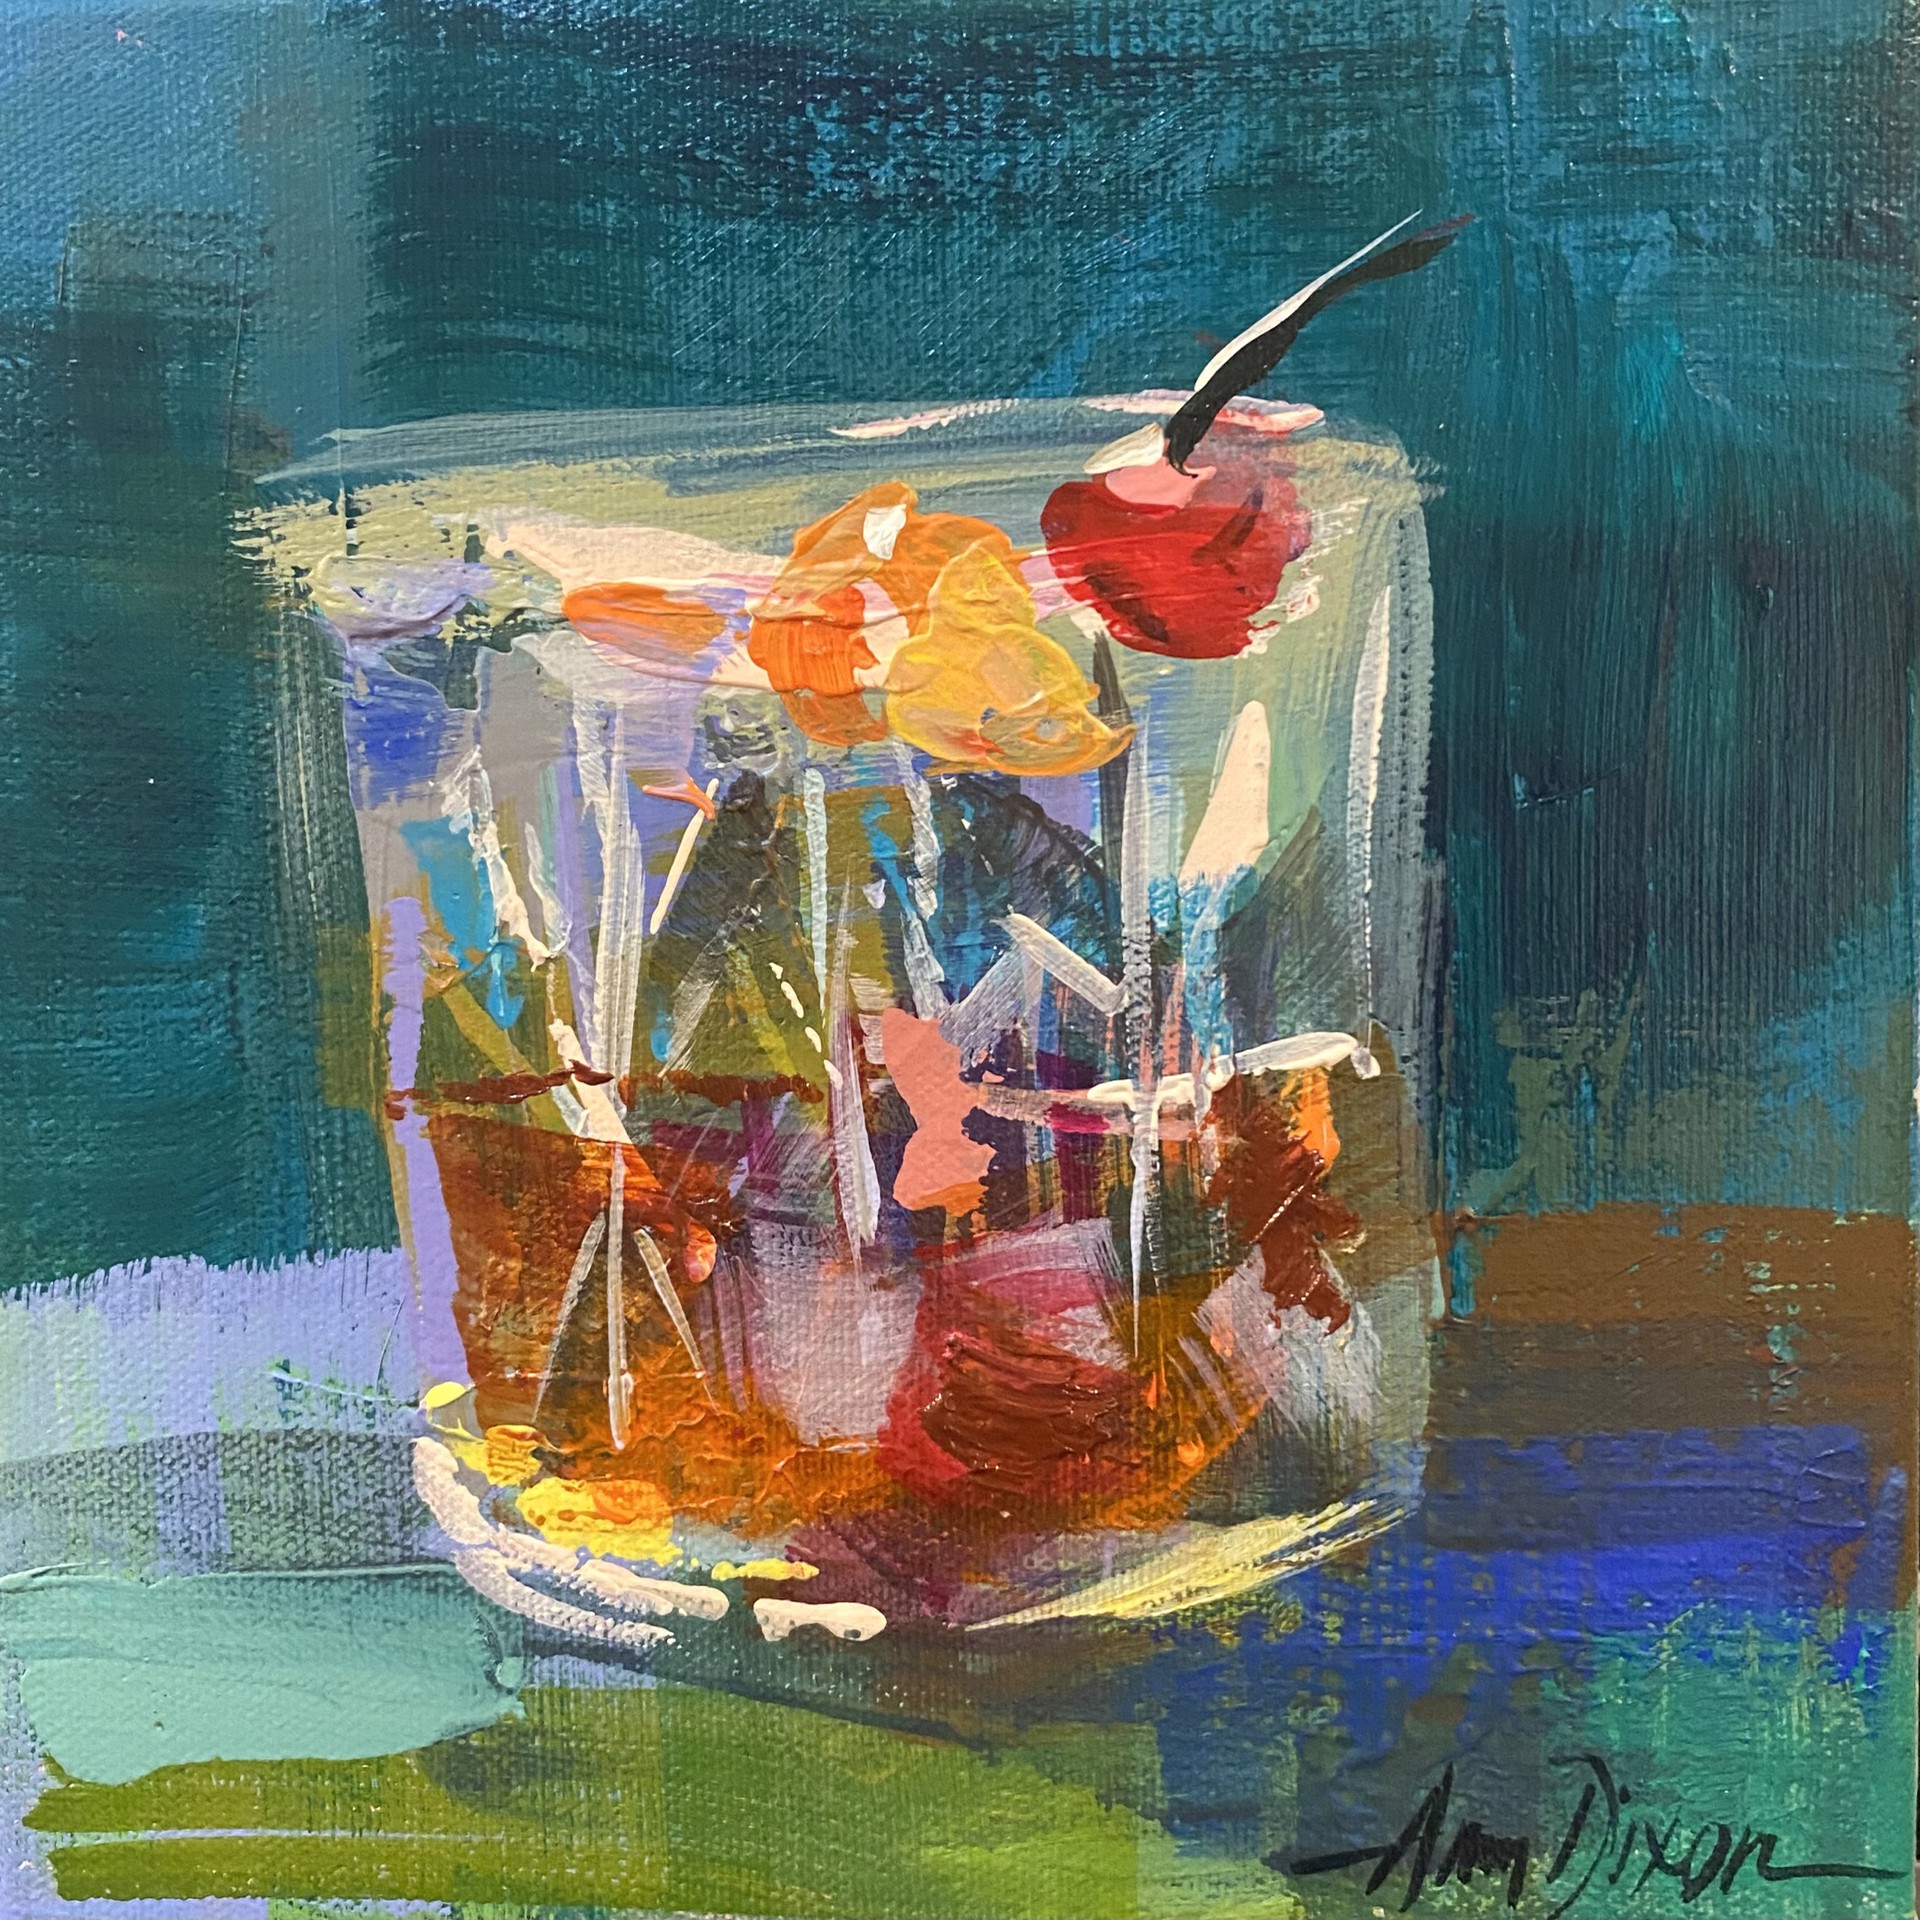 Old Fashion by Amy Dixon